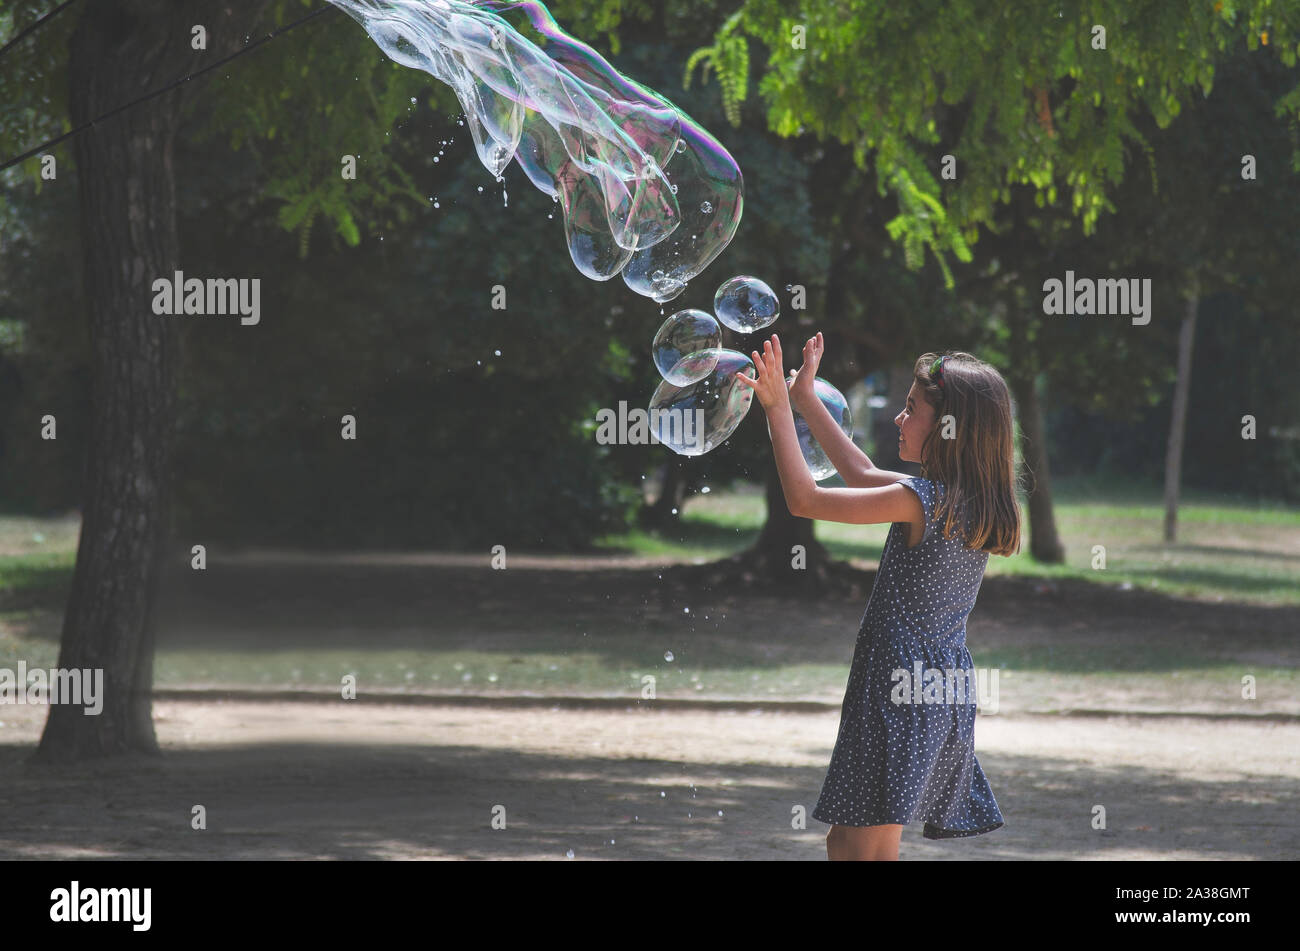 Girl playing with giant bubbles in a park, France Stock Photo